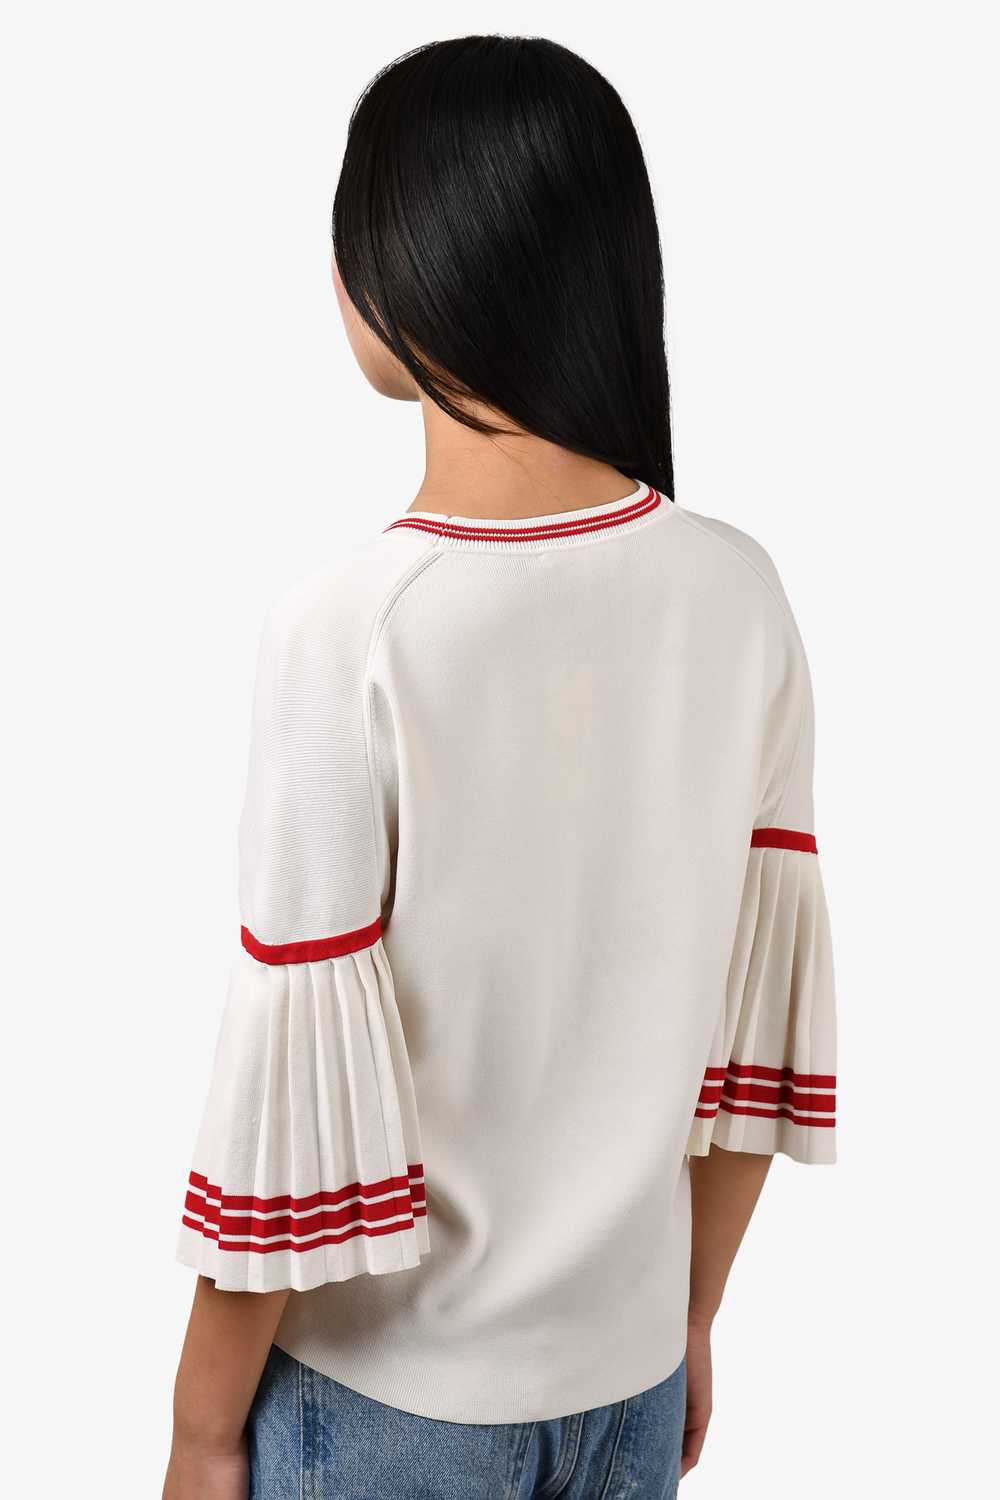 Maje White and Red Knit Pleated Sleeve Top Size 1 - image 3